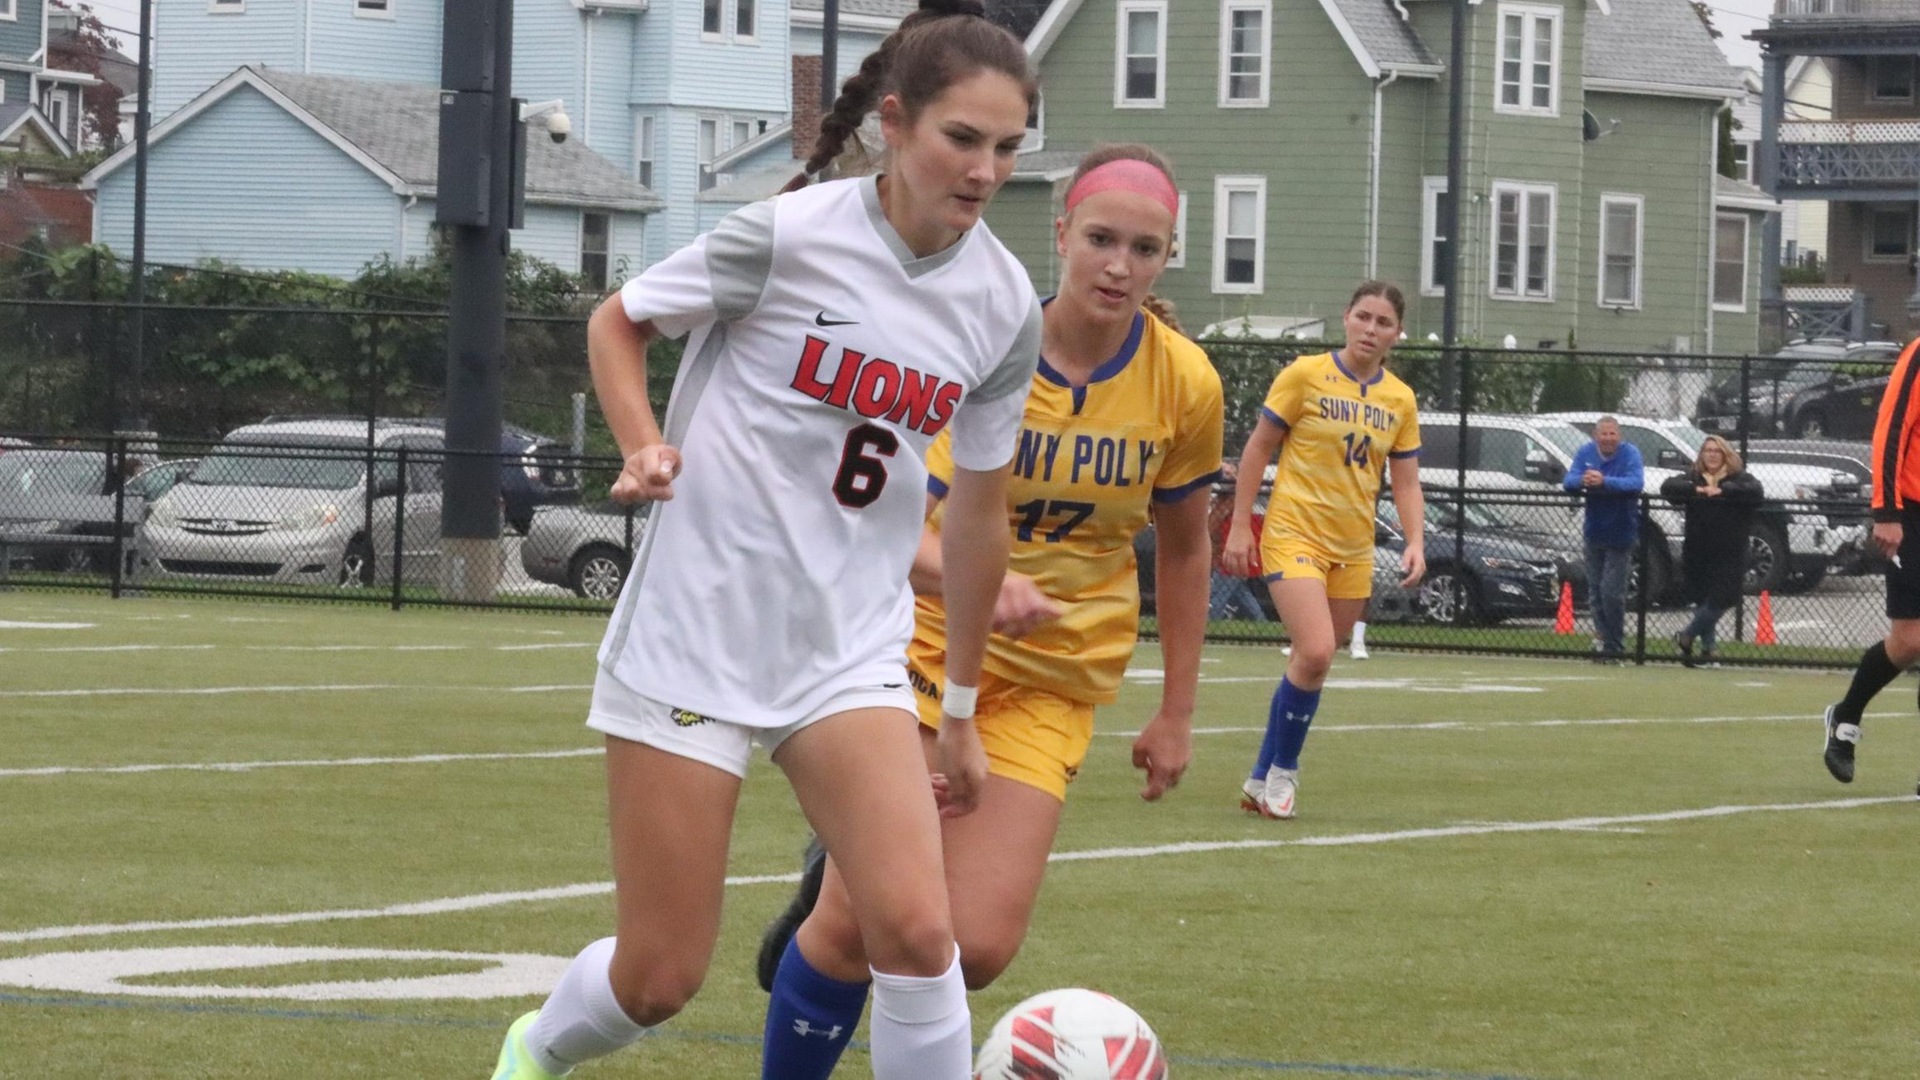 Women’s Soccer Falls to SUNY Poly, 3-0